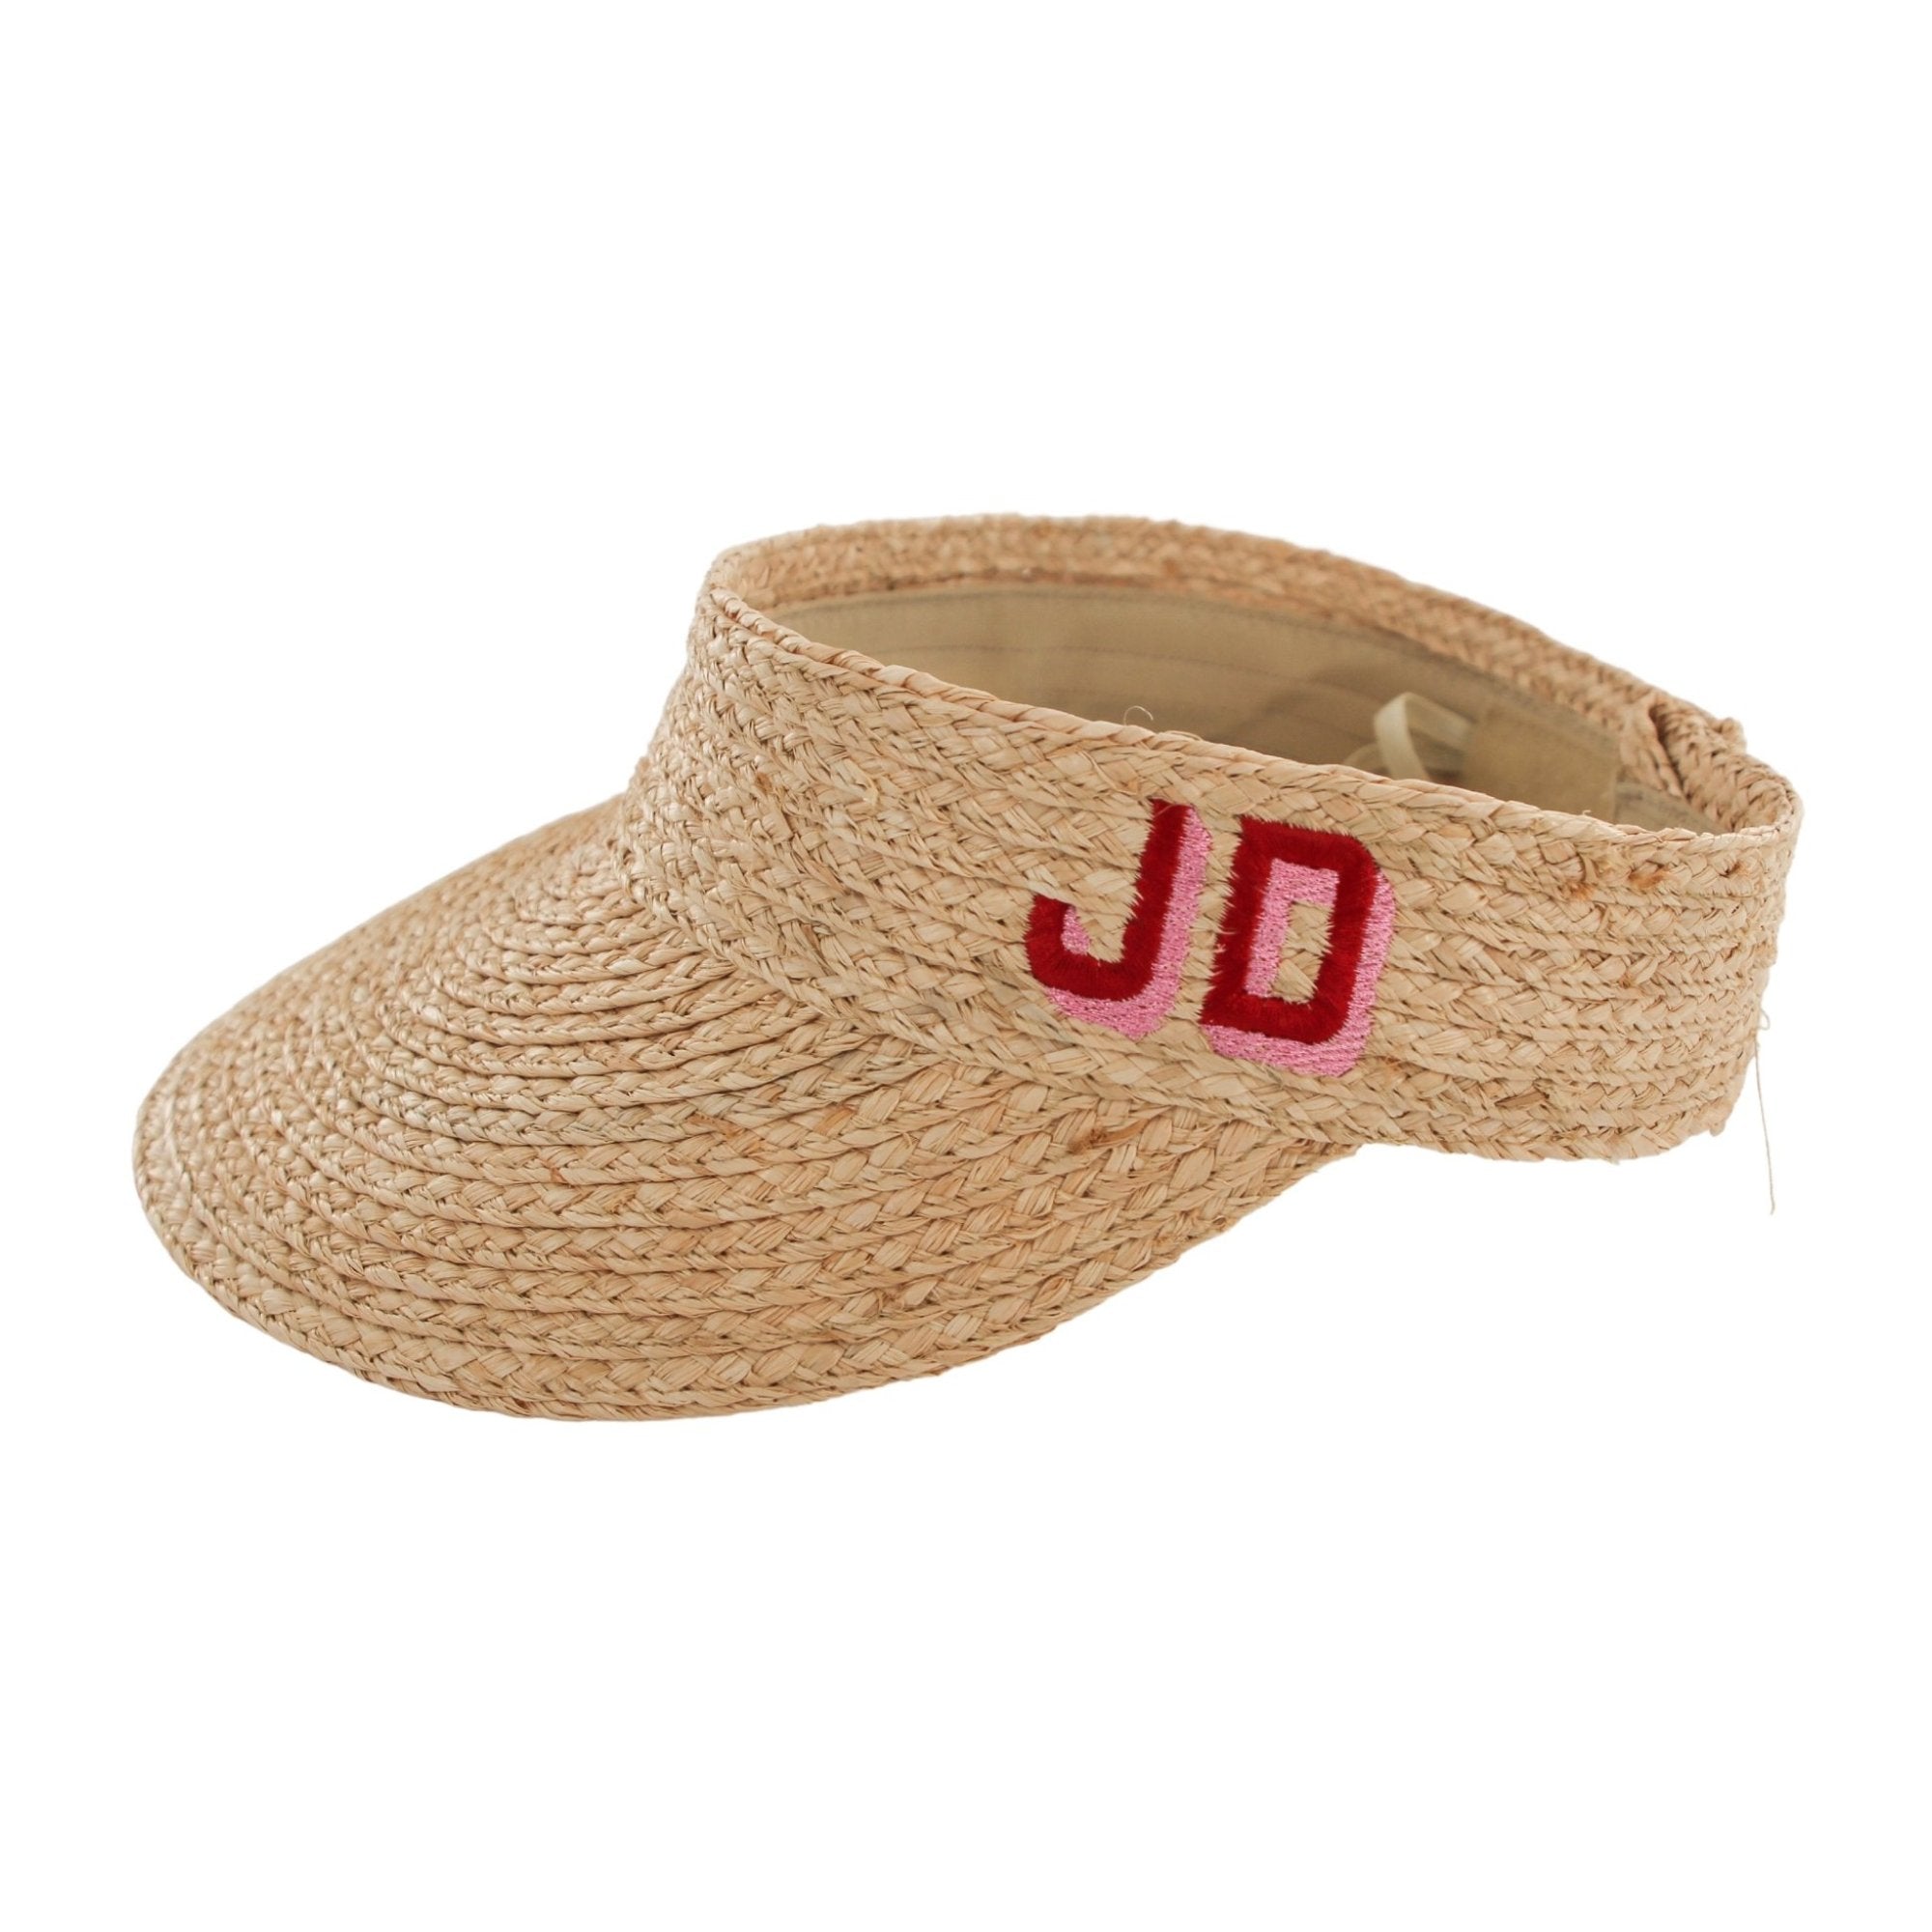 Personalized Custom Name Text Embroidery Beach Hats for Women Sun Straw Hat Wide Brim Foldable Roll Up Floppy Summer Hat